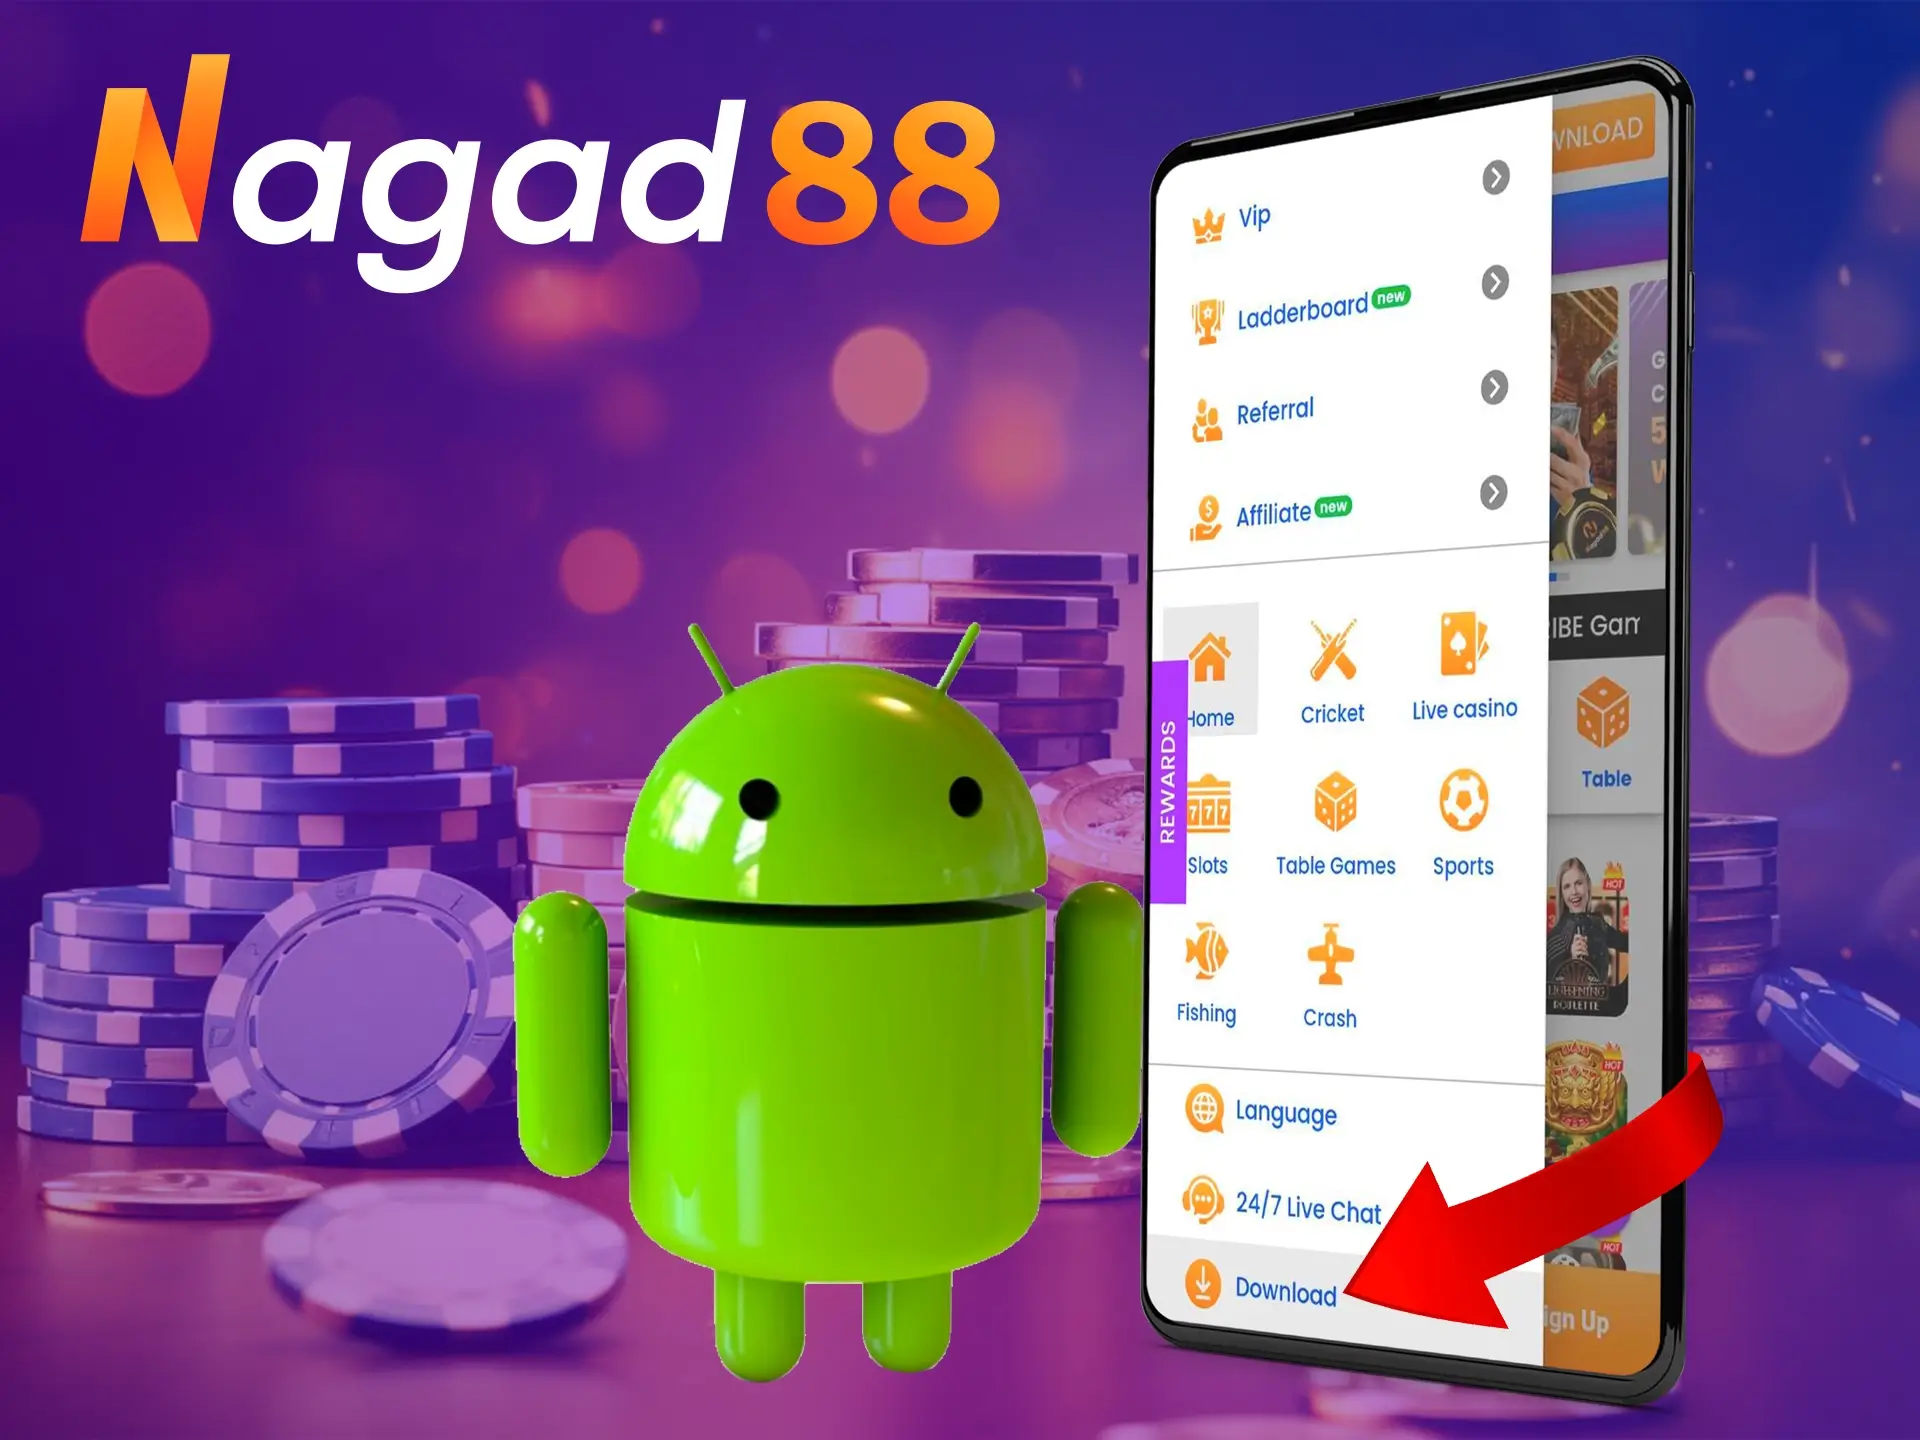 The Nagad88 app for Android works great and gives out high performance.